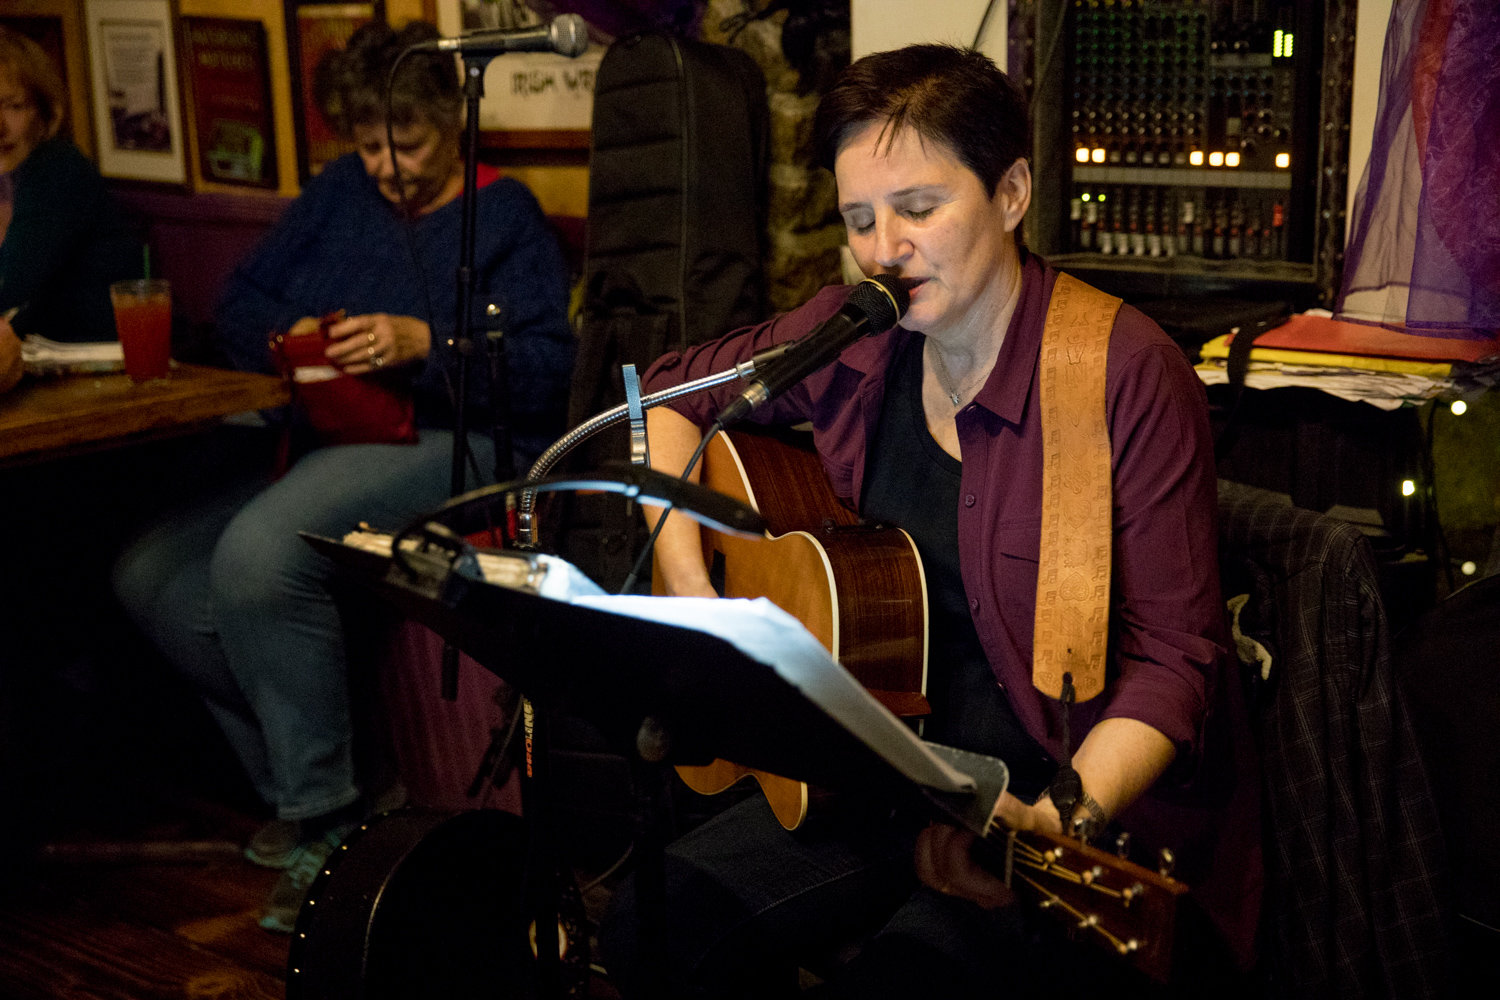 Mary Courtney plays music at An Beal Bocht Café where she is a regular at the West 238th Street venue.